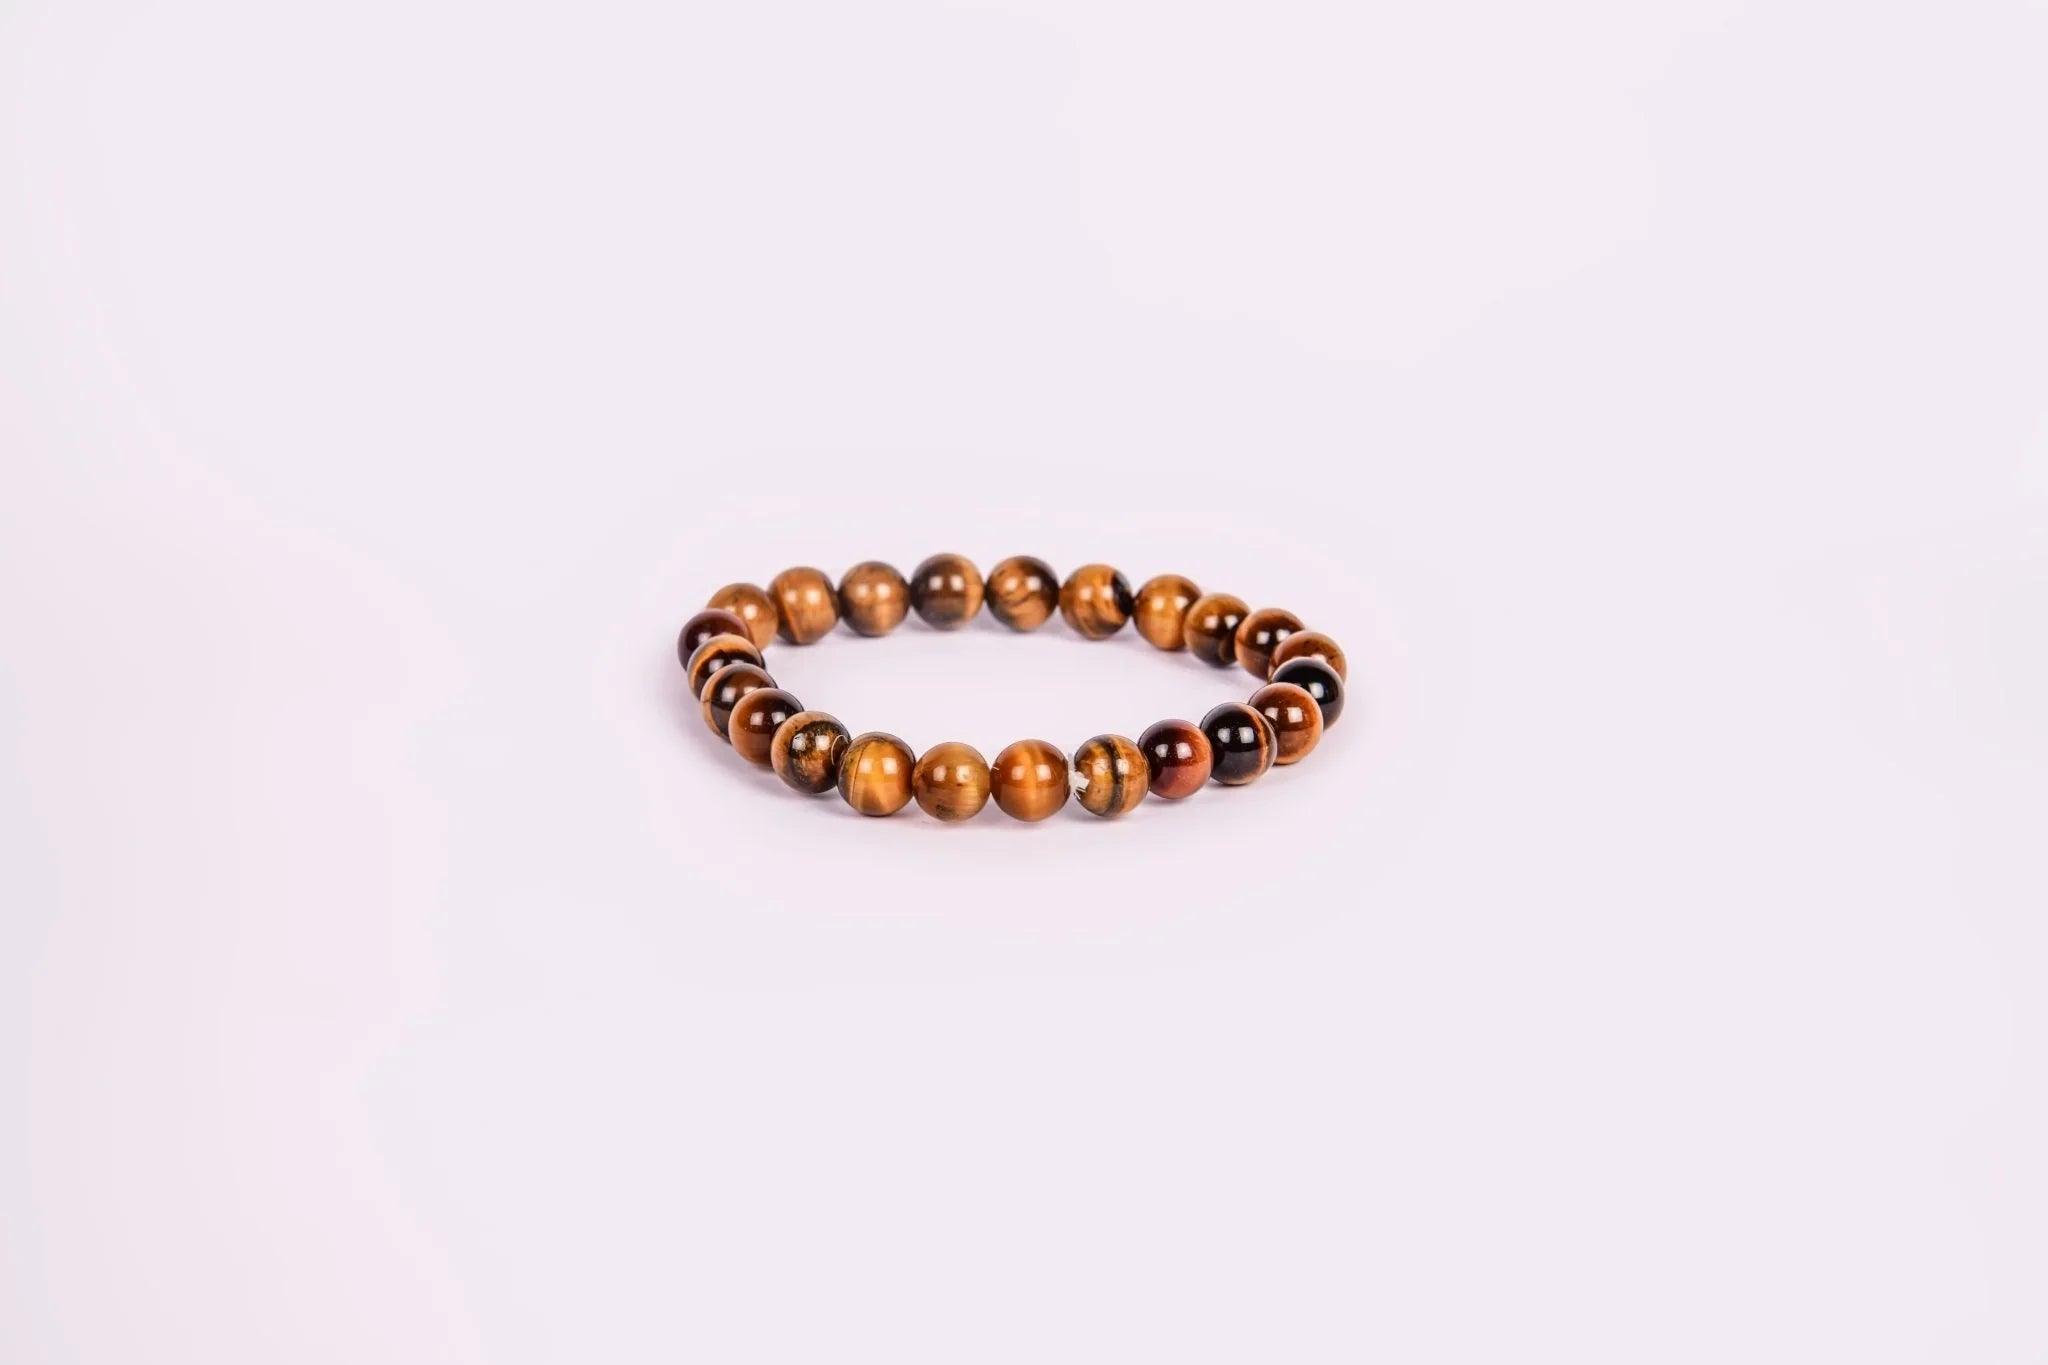 Natural Tigers Eye Brown Bracelet Half Round Shape Premium Quality With  Certificate - Brown Colour Tiger Eye Bracelet - Sujani Jewellers